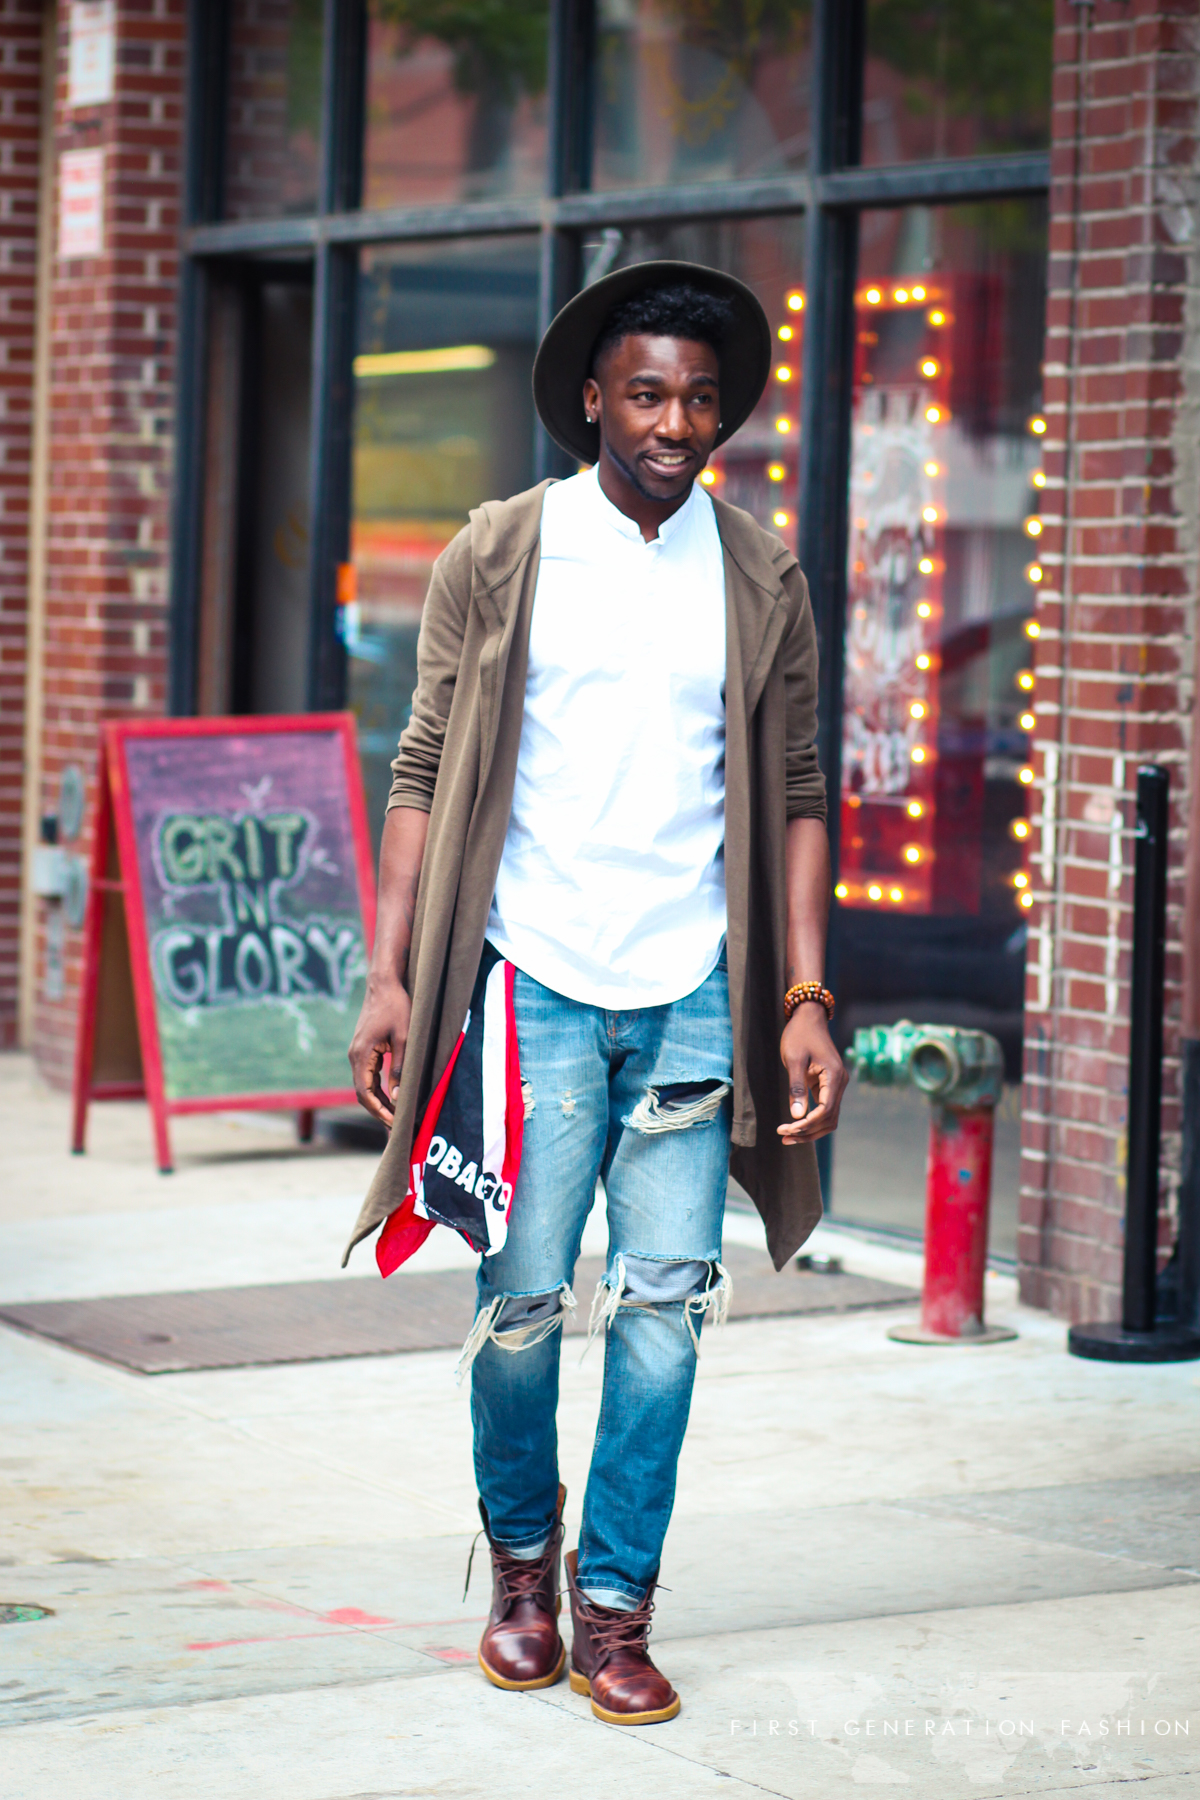 Jordan: From Trinidad to the Lower East Side - First Generation Fashion